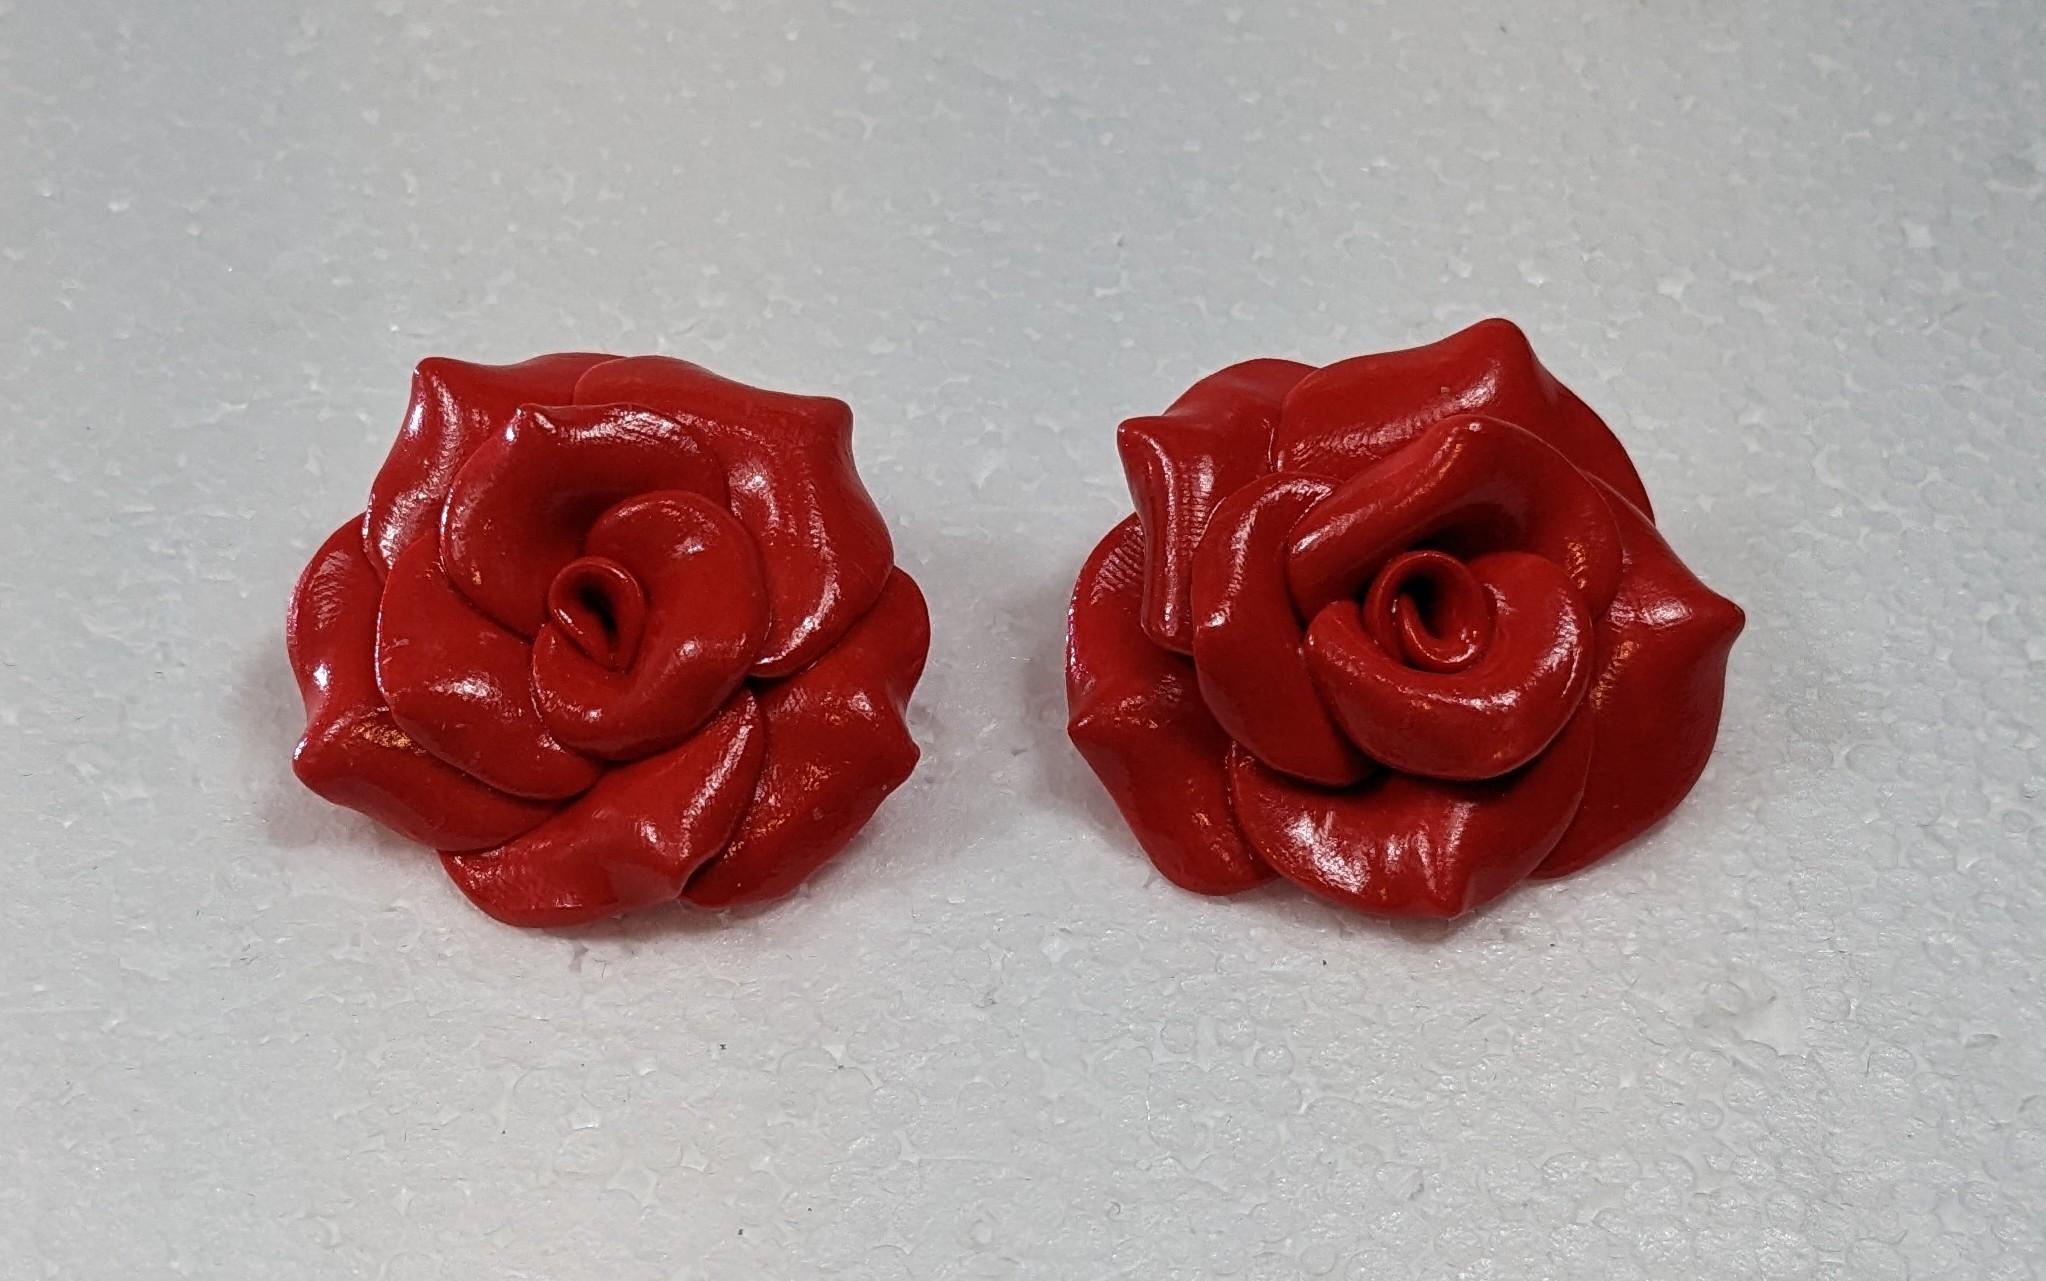  Red Camelia Polymer  Clay Earrings with golplated silver closure

Diameter: 4 cm
Weight: 16 grams
Color  Red
Handmade




Pradera Fashion Division  is specialized in European Fashion designers, clothing, handbags, accessories and as such we sell